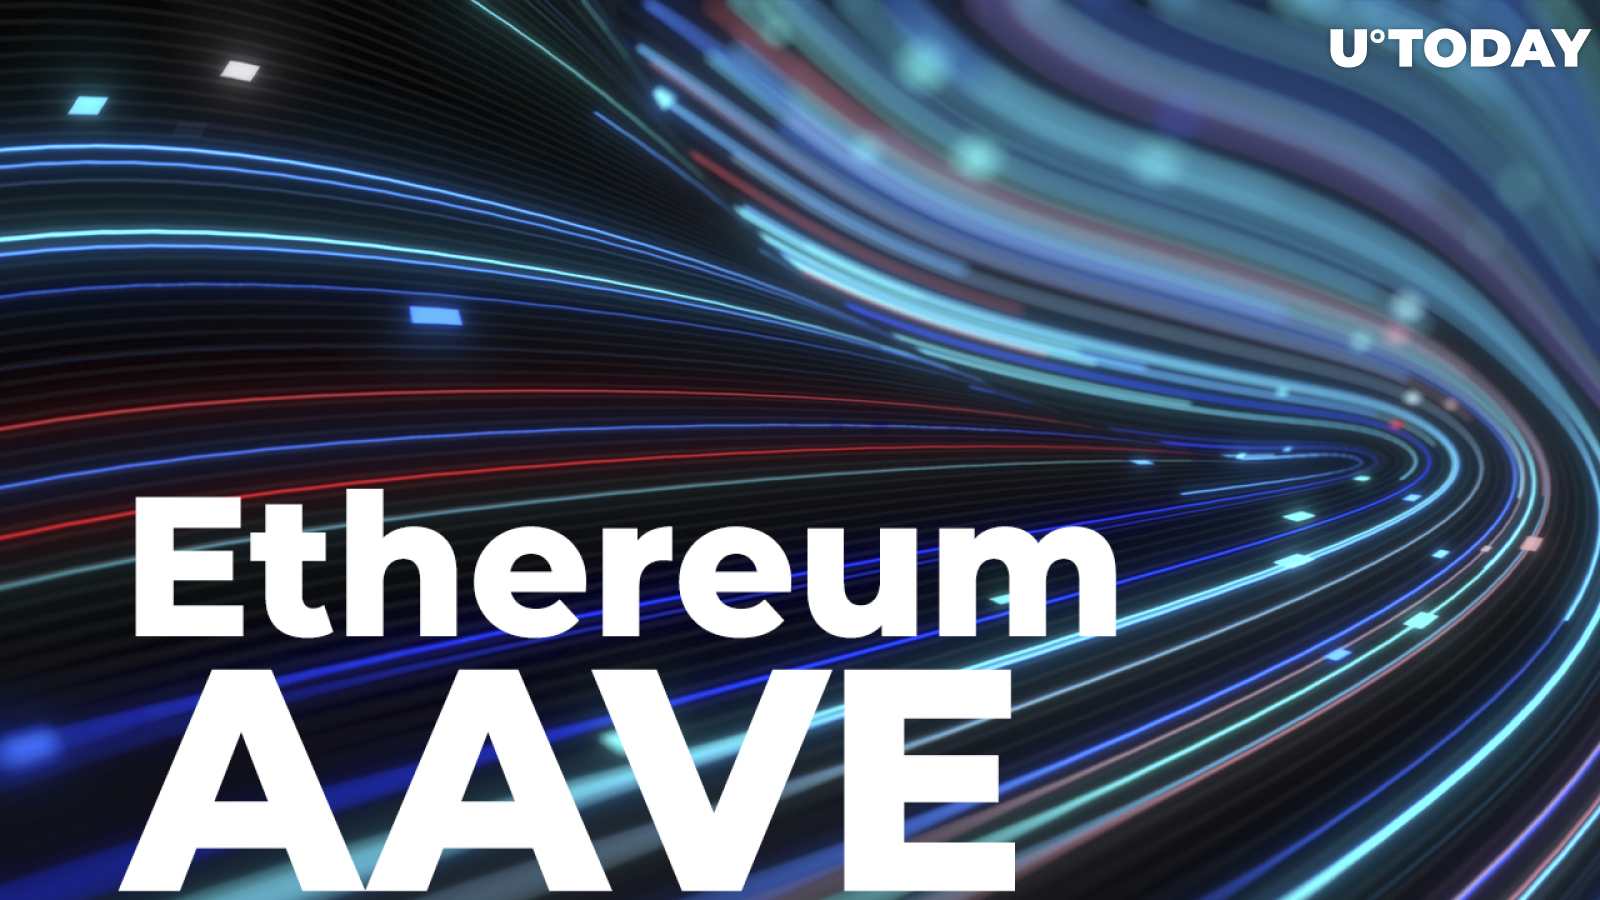 Ethereum and AAVE Smart Contract Usage Spikes by 100%